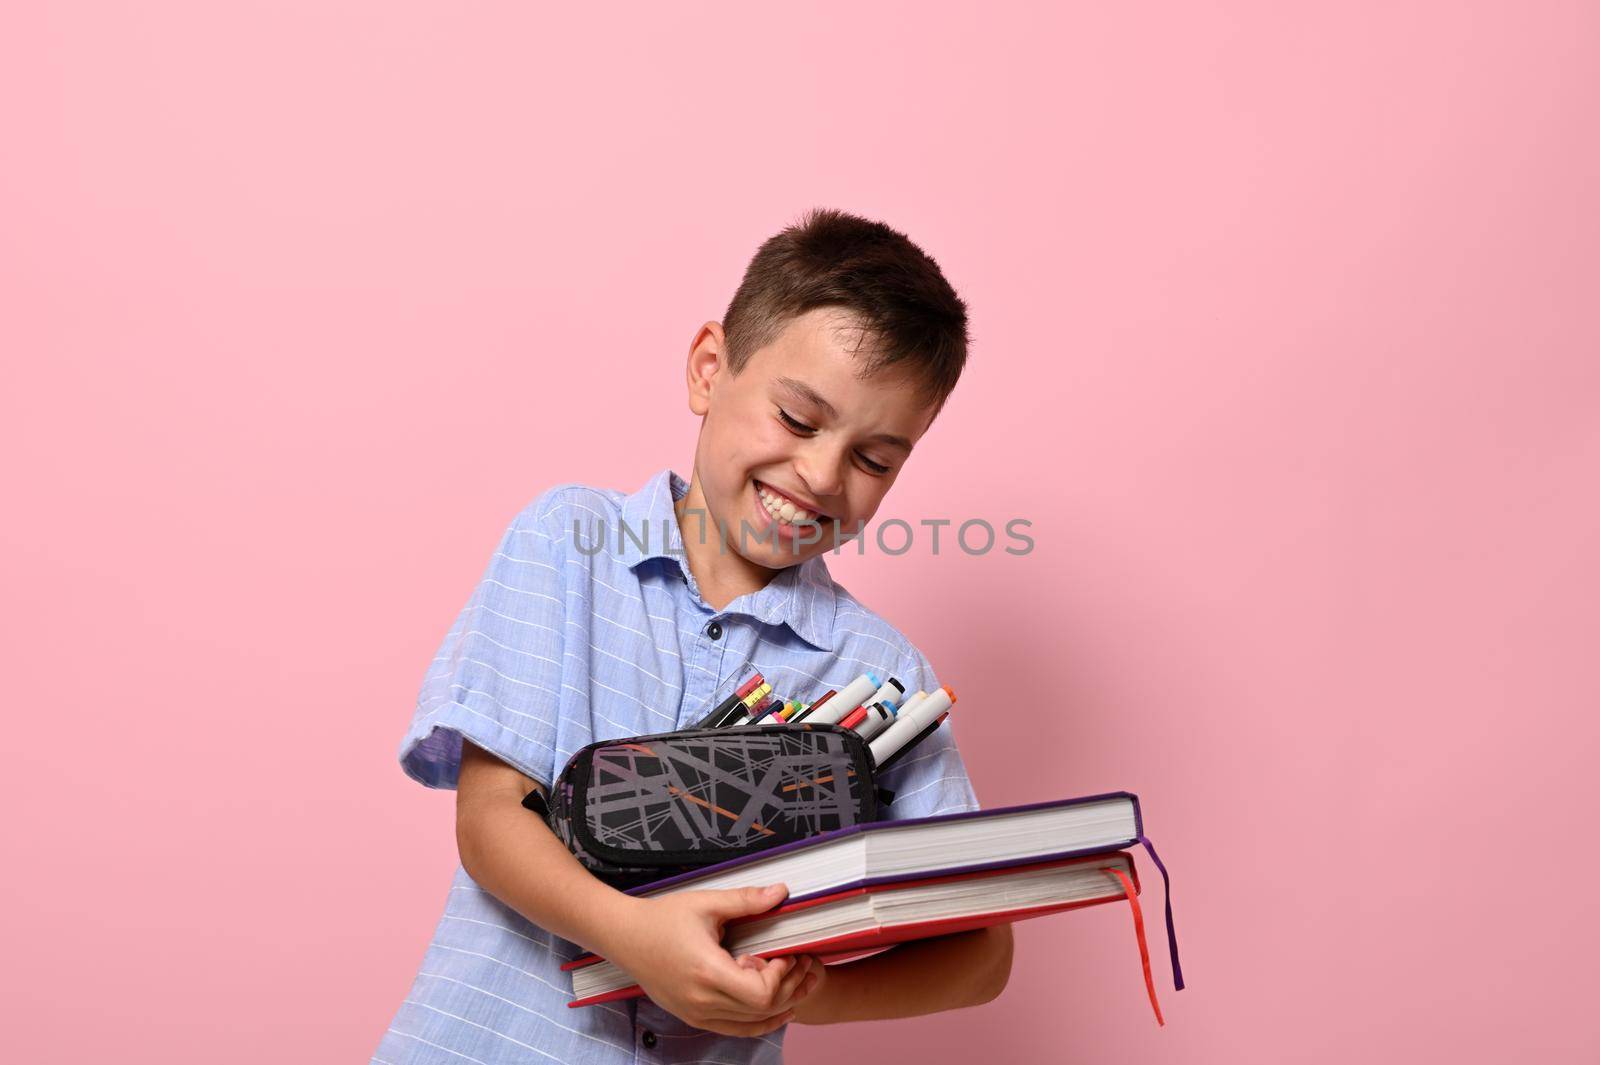 A school boy with pencil case and books laughing , posing over pink background with copy space. Concepts of back to school with facial expressions and emotions by artgf